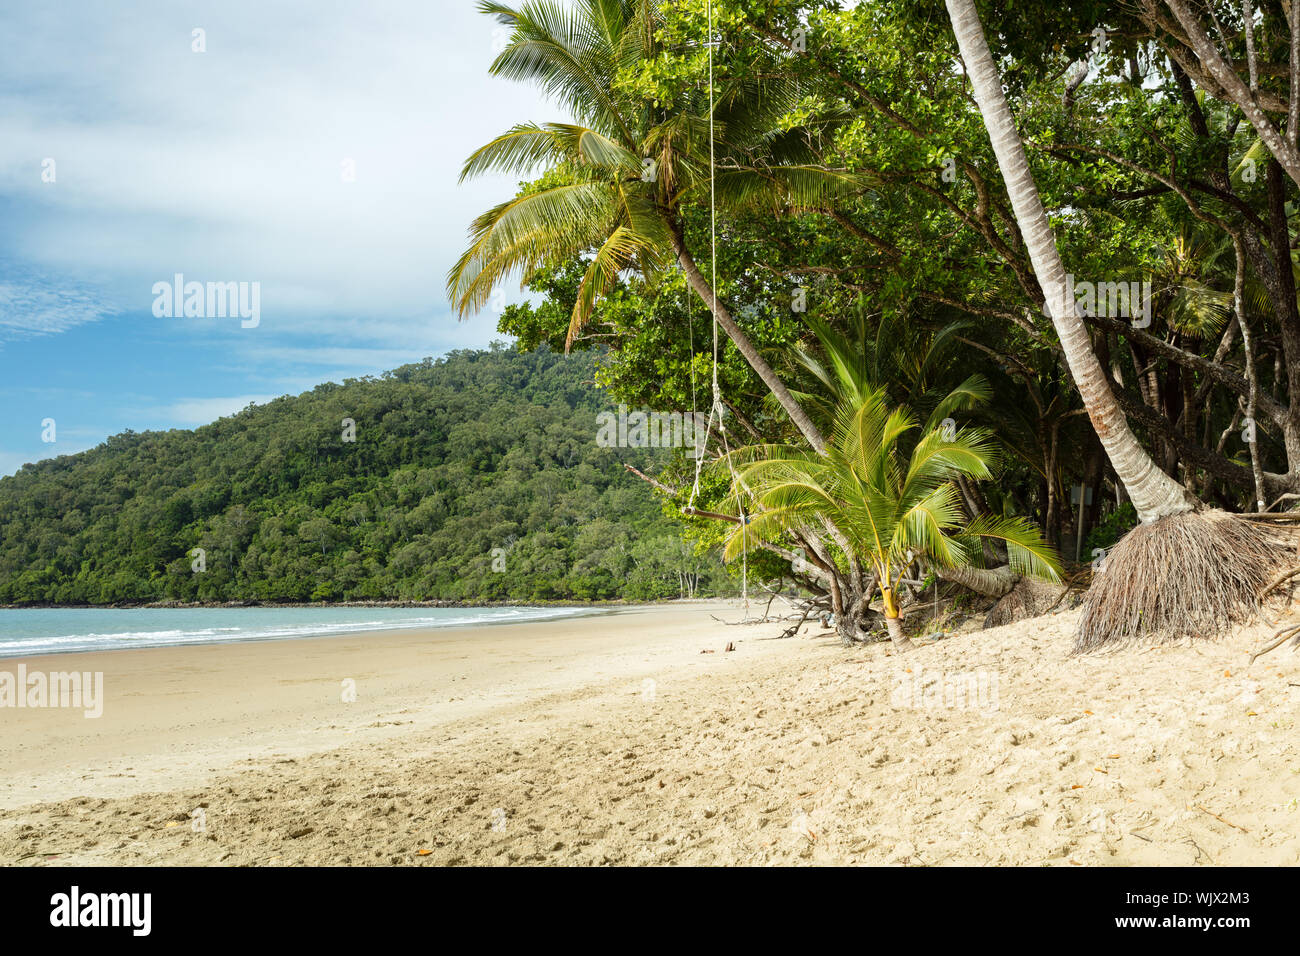 Daintree National Park, Queensland, Australia. The broad expanse of golden sand of Cow Bay Beach in Daintree National Park in tropical Far North Queen Stock Photo